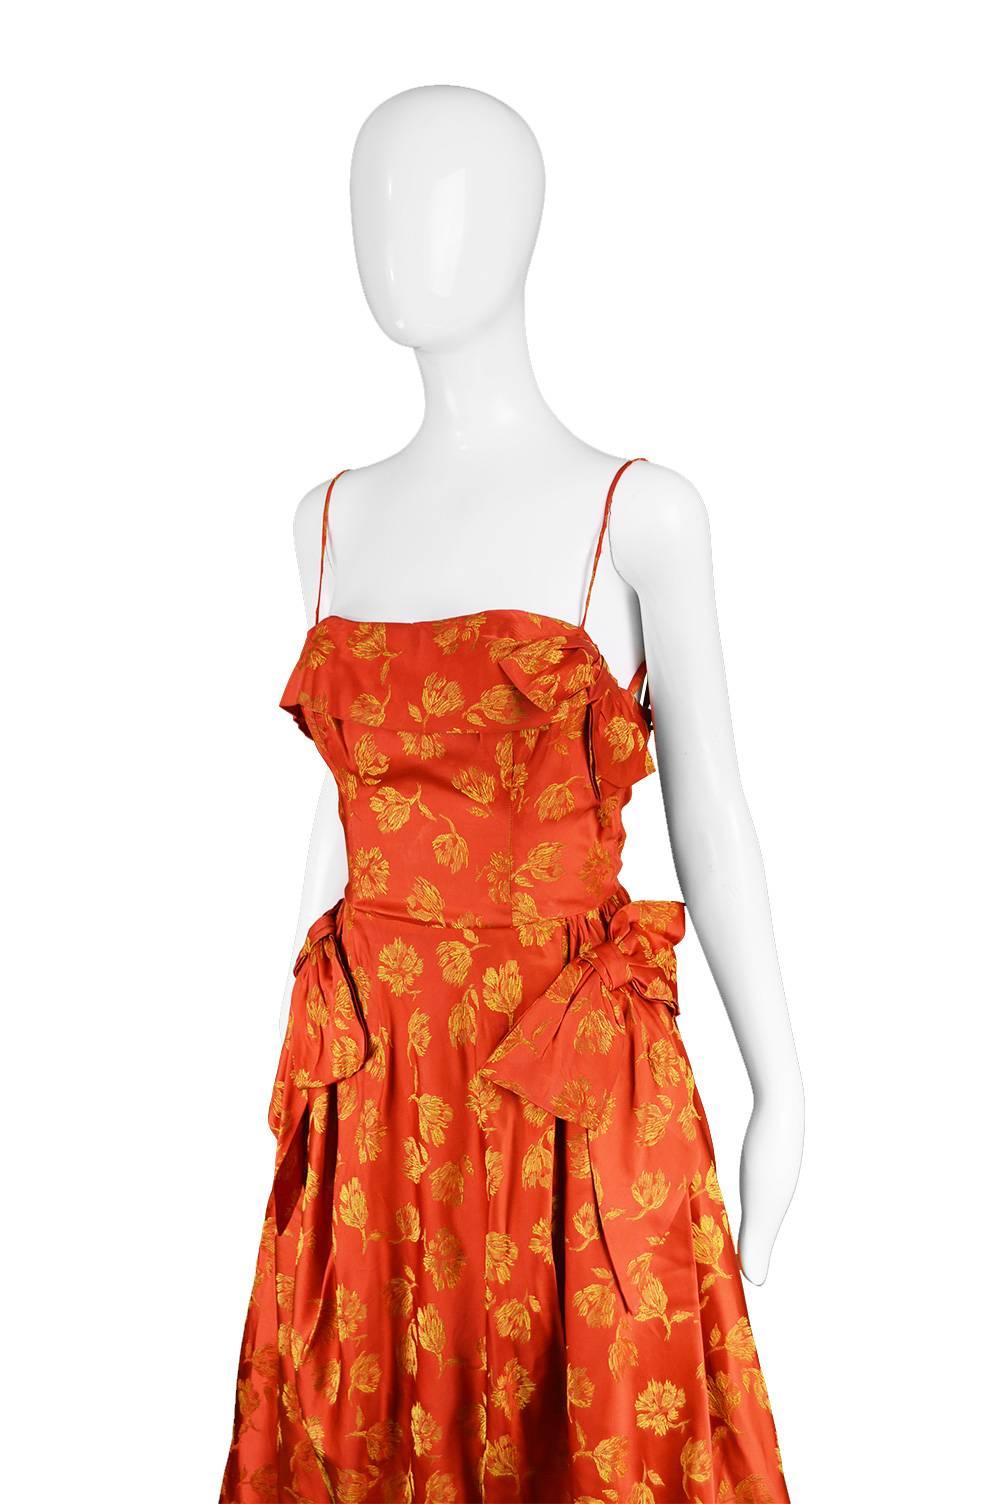 John Selby 1950s Vintage Red & Gold Brocade Jacquard Panelled Dress 1